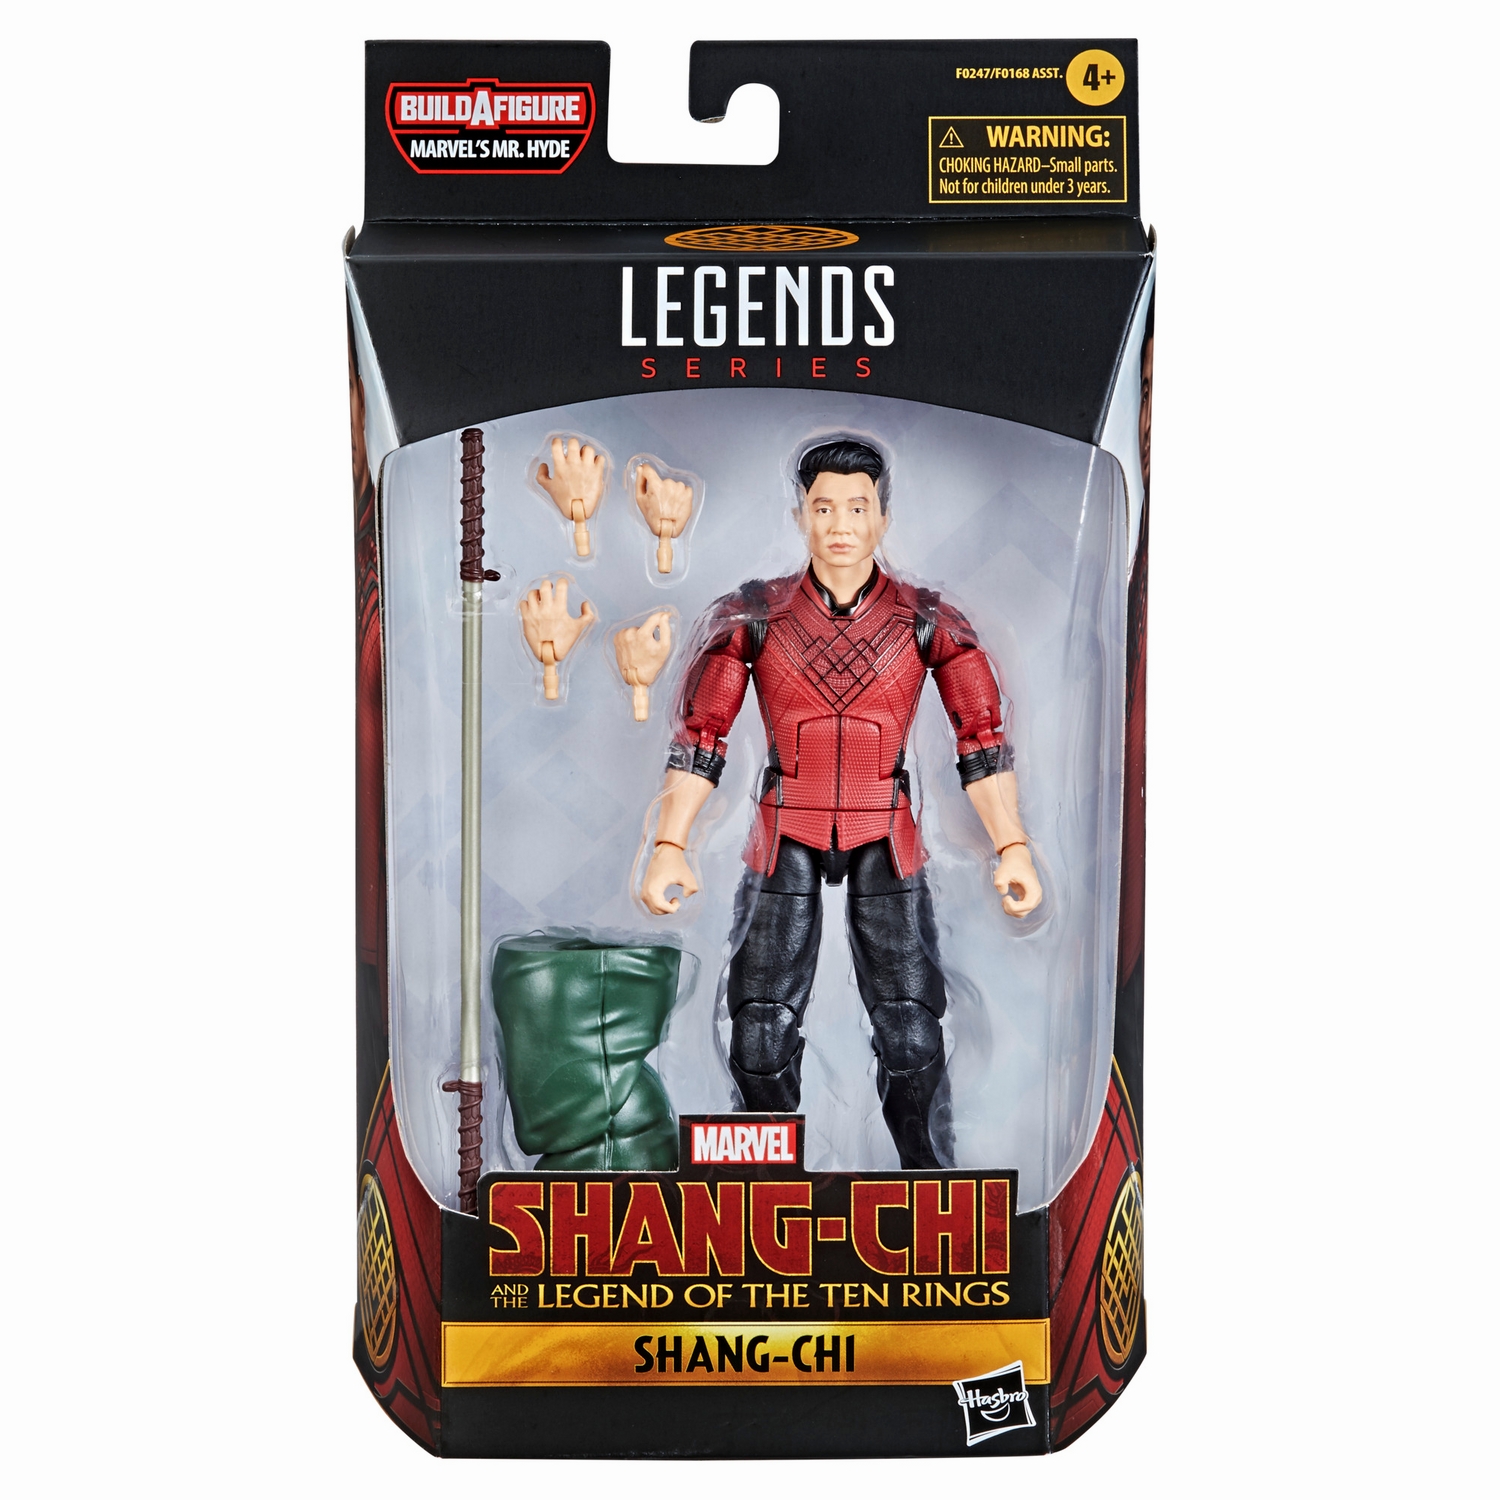 MARVEL LEGENDS SERIES 6-INCH SHANG-CHI AND THE LEGEND OF THE TEN RINGS - Shang-Chi inpk.jpg